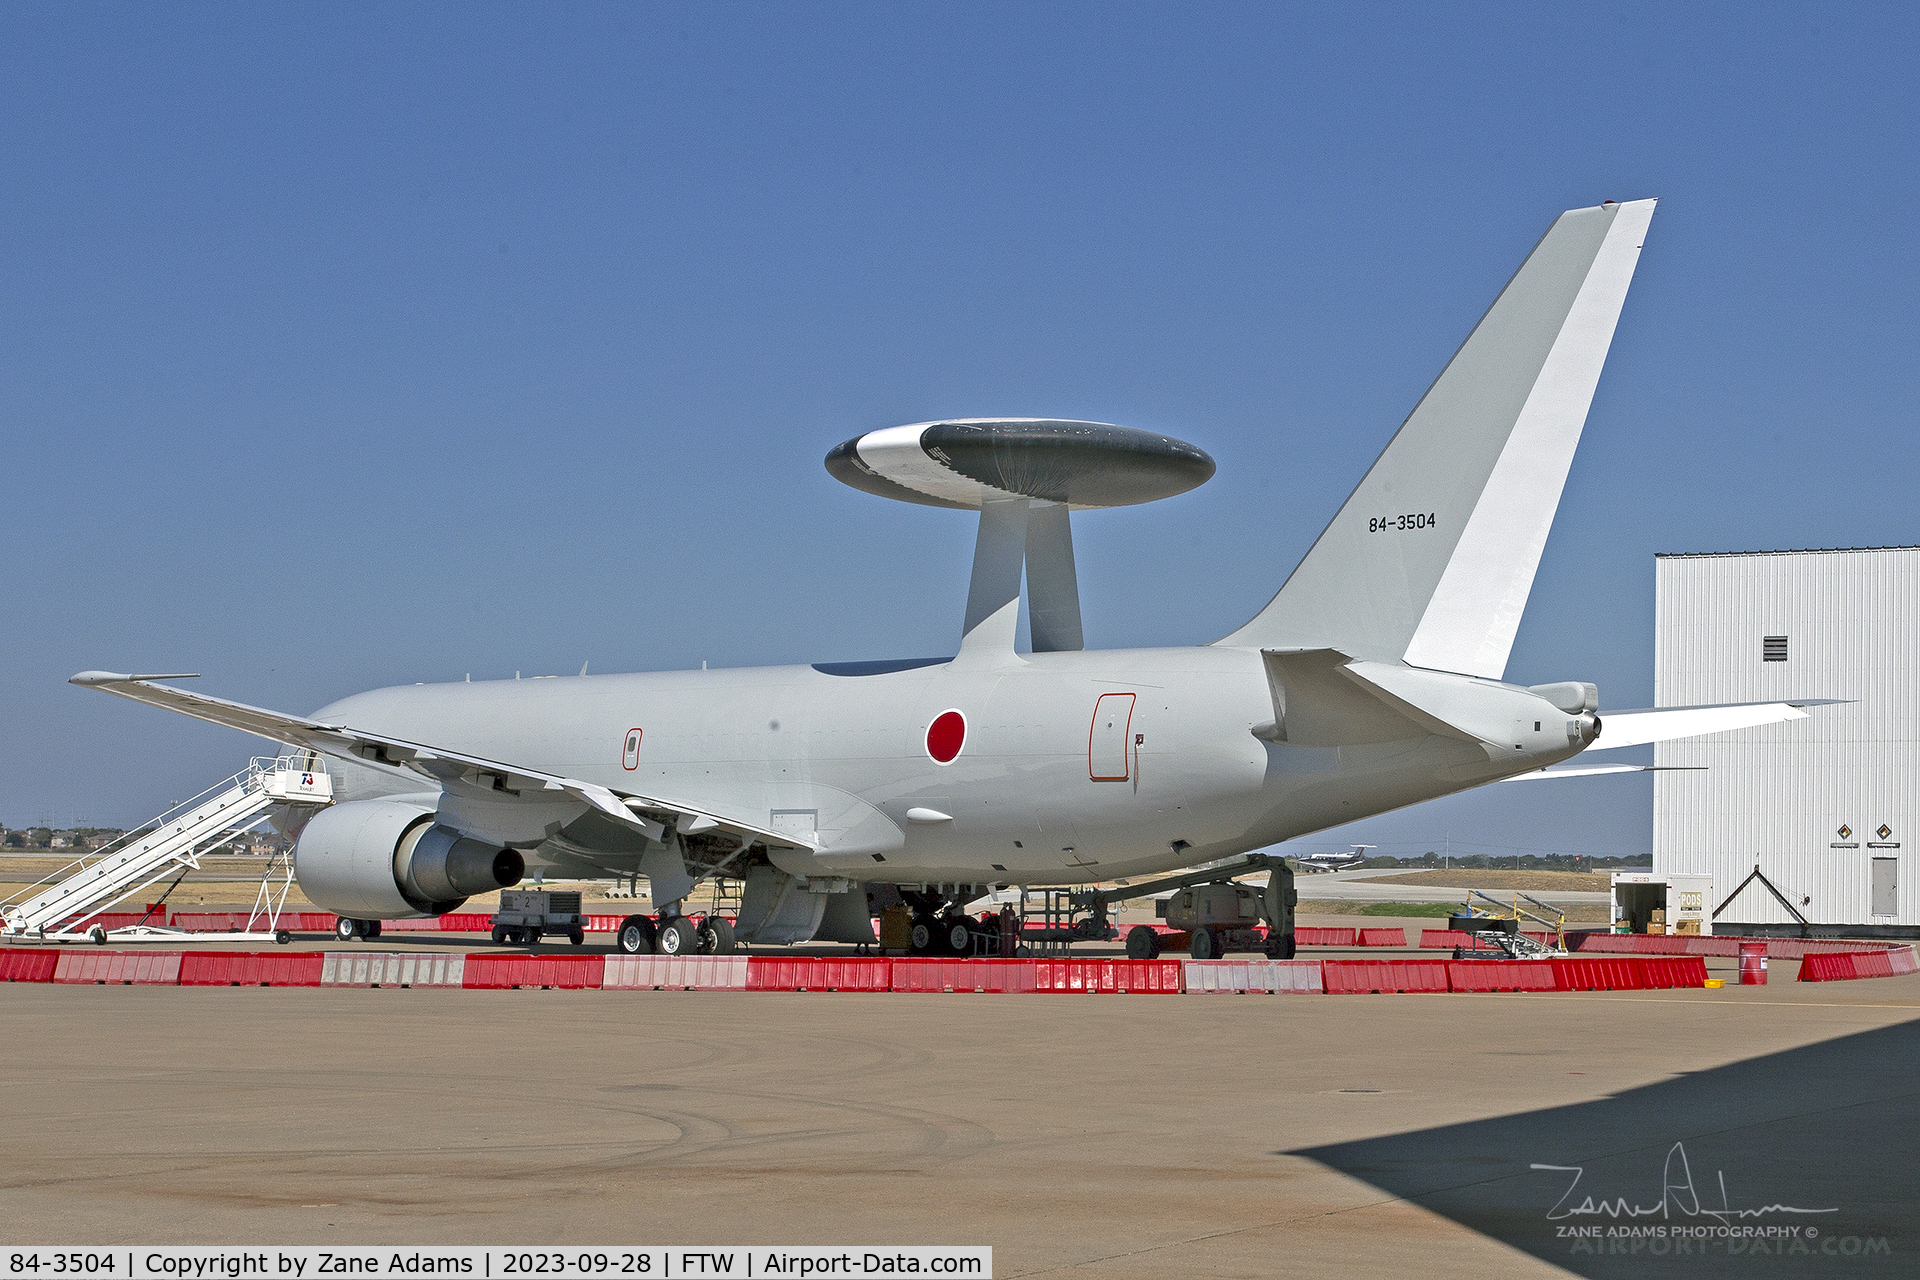 84-3504, 1998 Boeing E-767 C/N 28017, Japanese Defence Forces E-767 (AWACS) at Fort Worth Mecham Field paint hangar